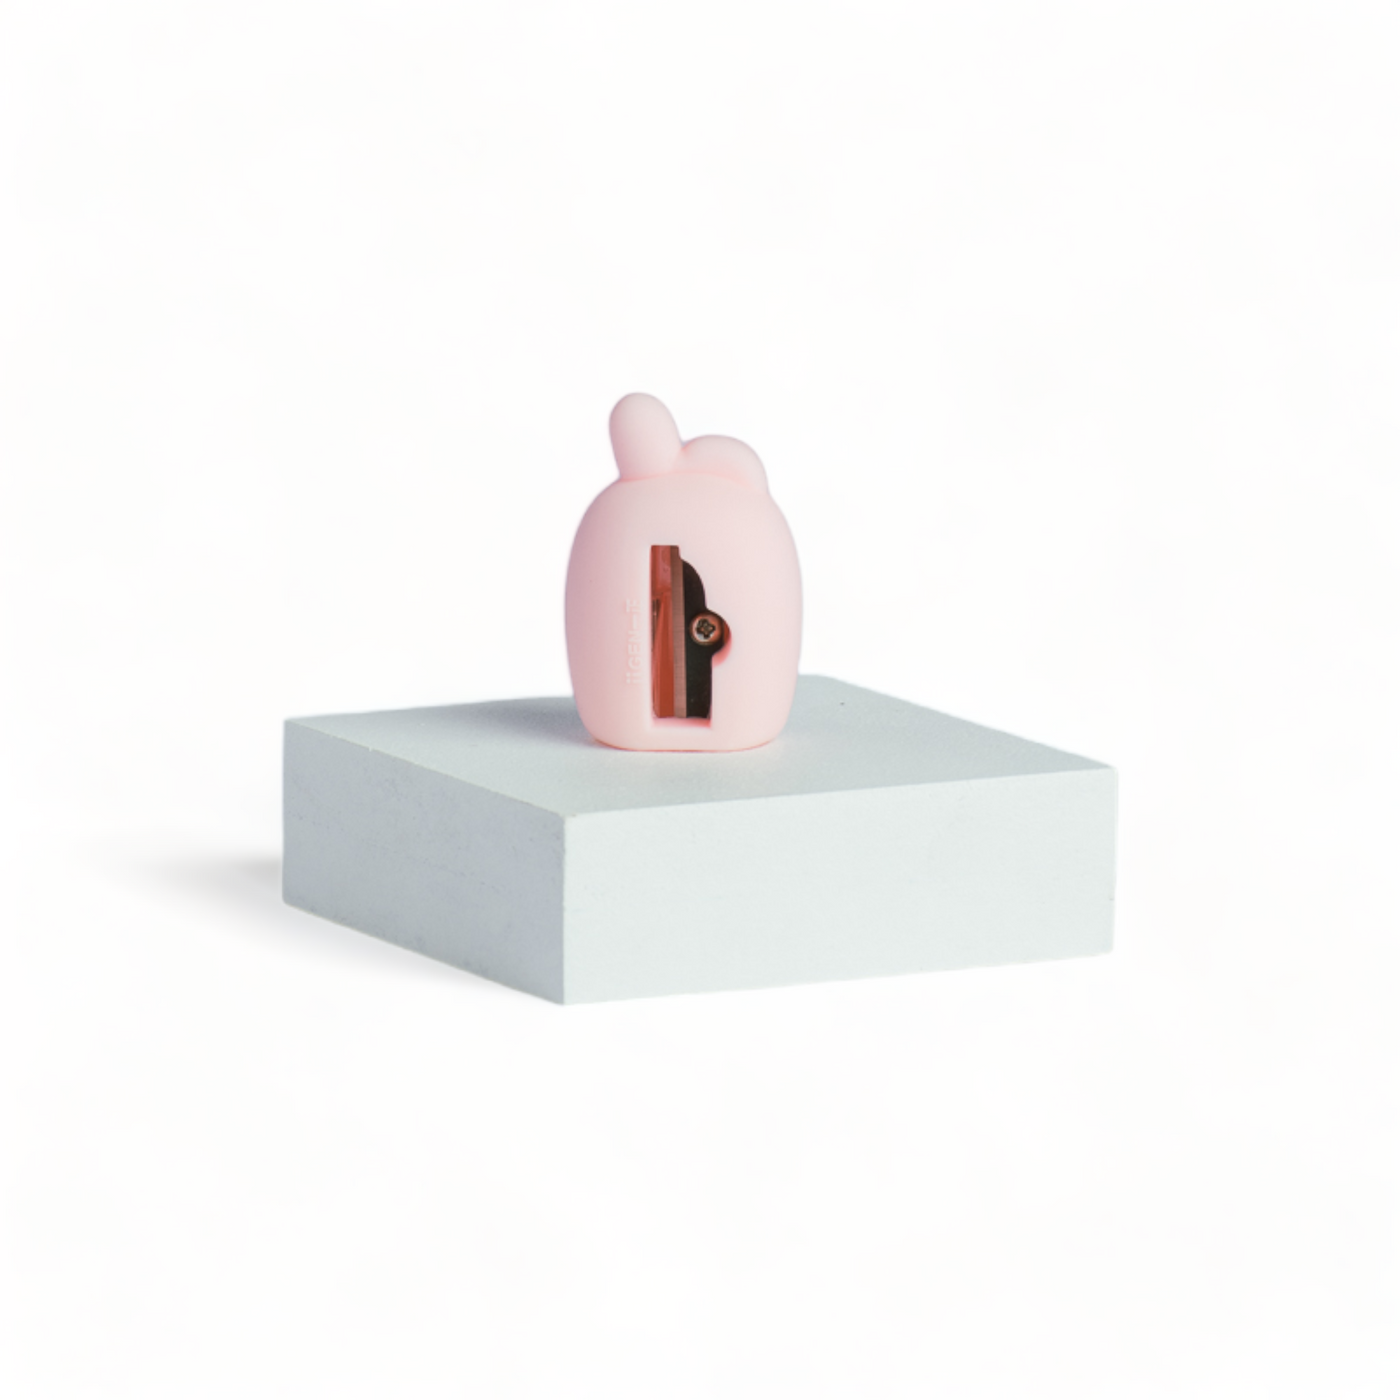 Silicon Animal Shaped Pencil Sharpeners